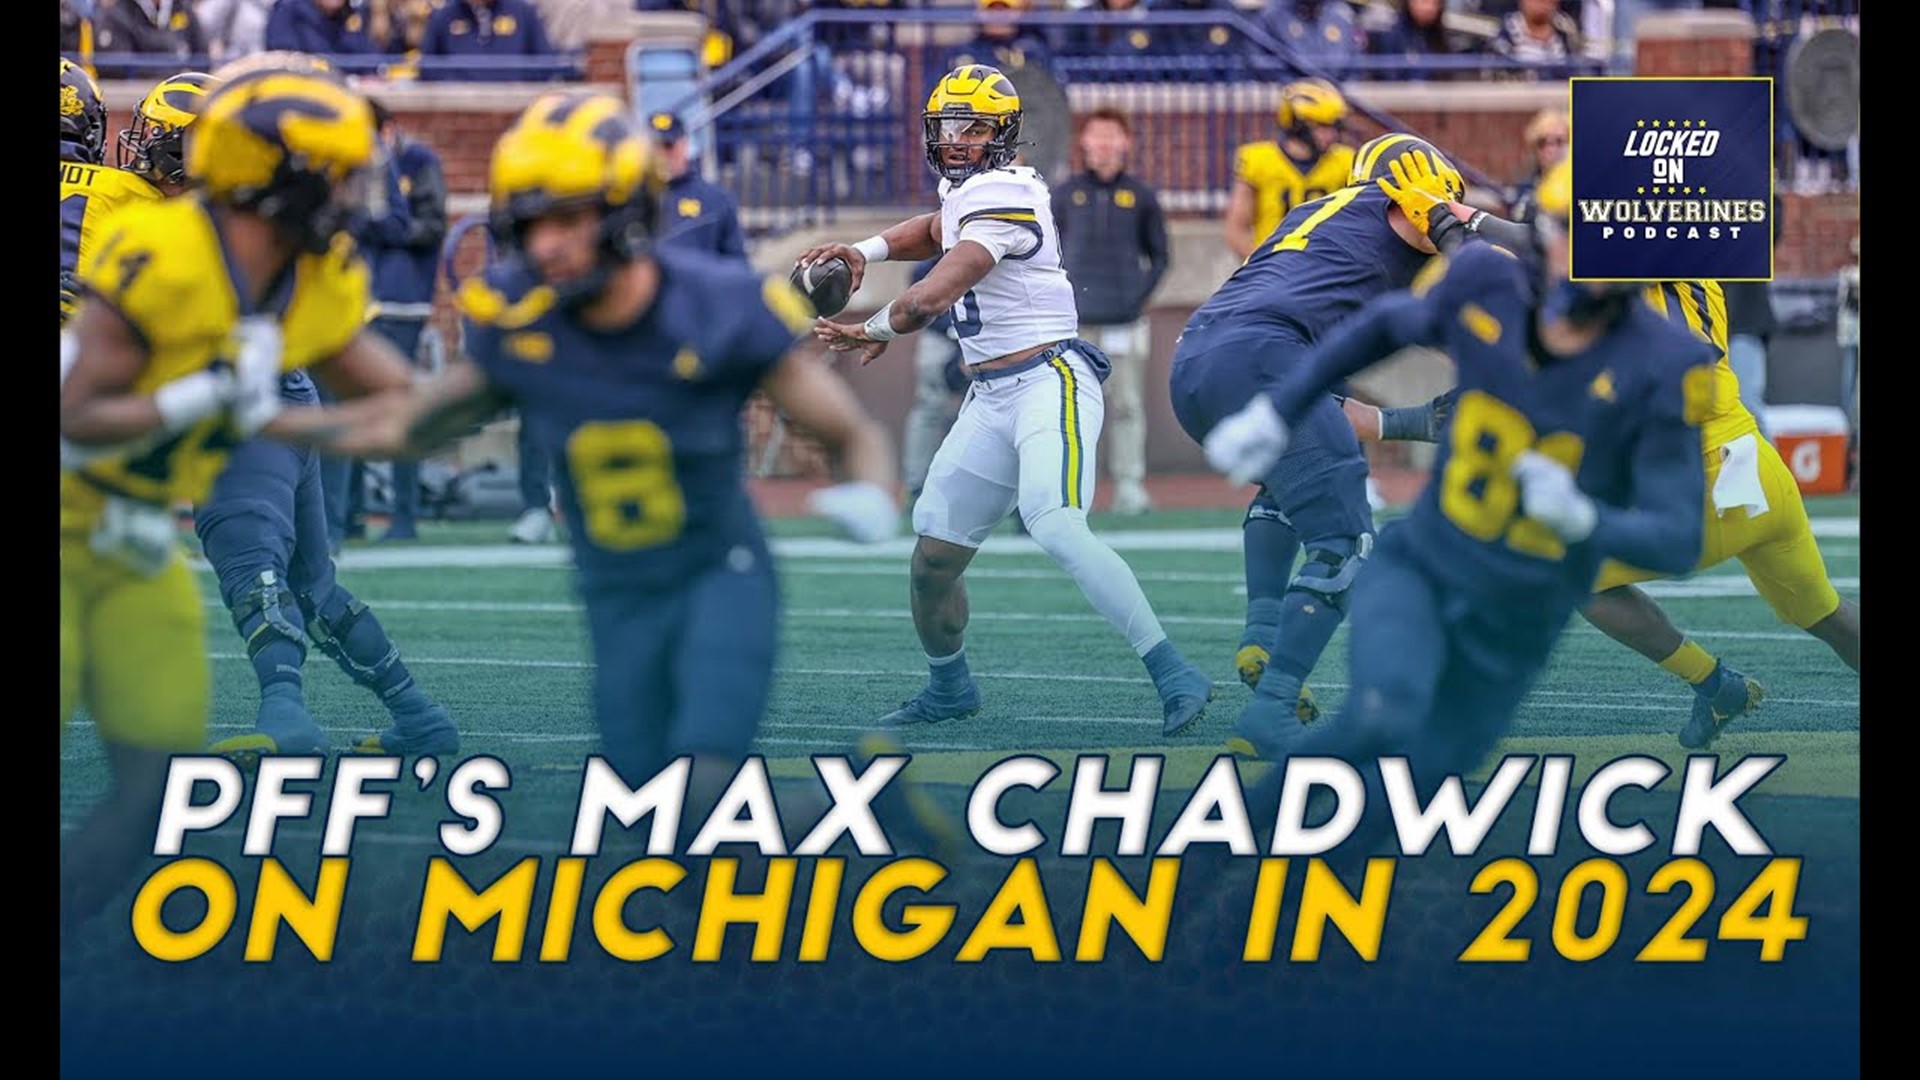 Special guest: PFF college football analyst Max Chadwick